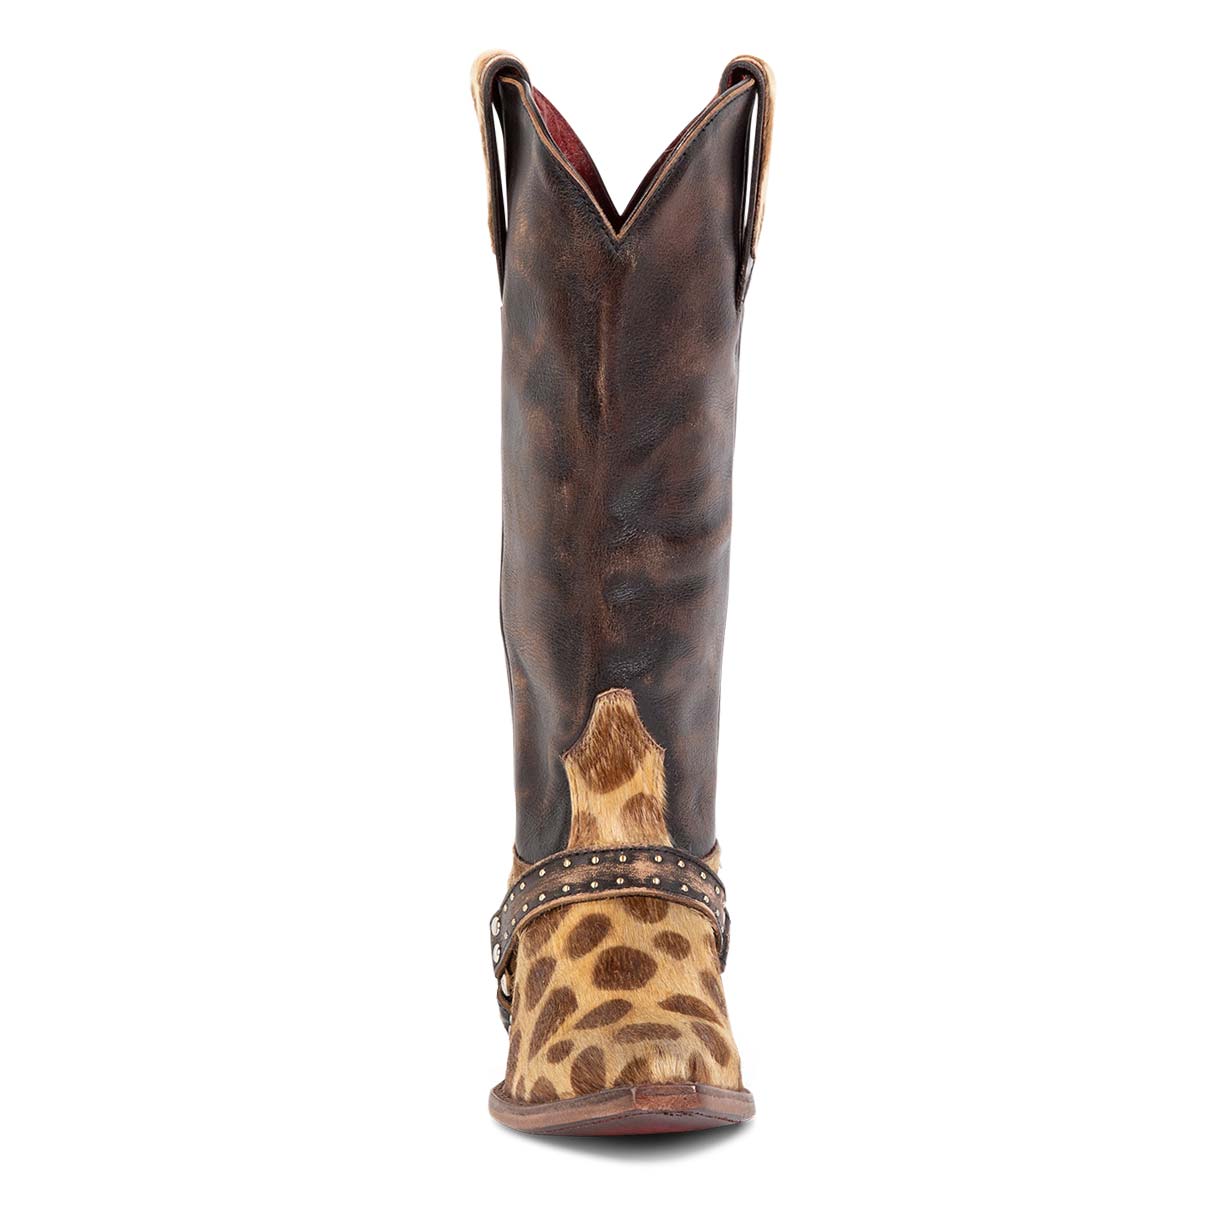 Front view showing scallop dip and leather harness with silver stud detailing on FREEBIRD women's Lusitano leopard boot